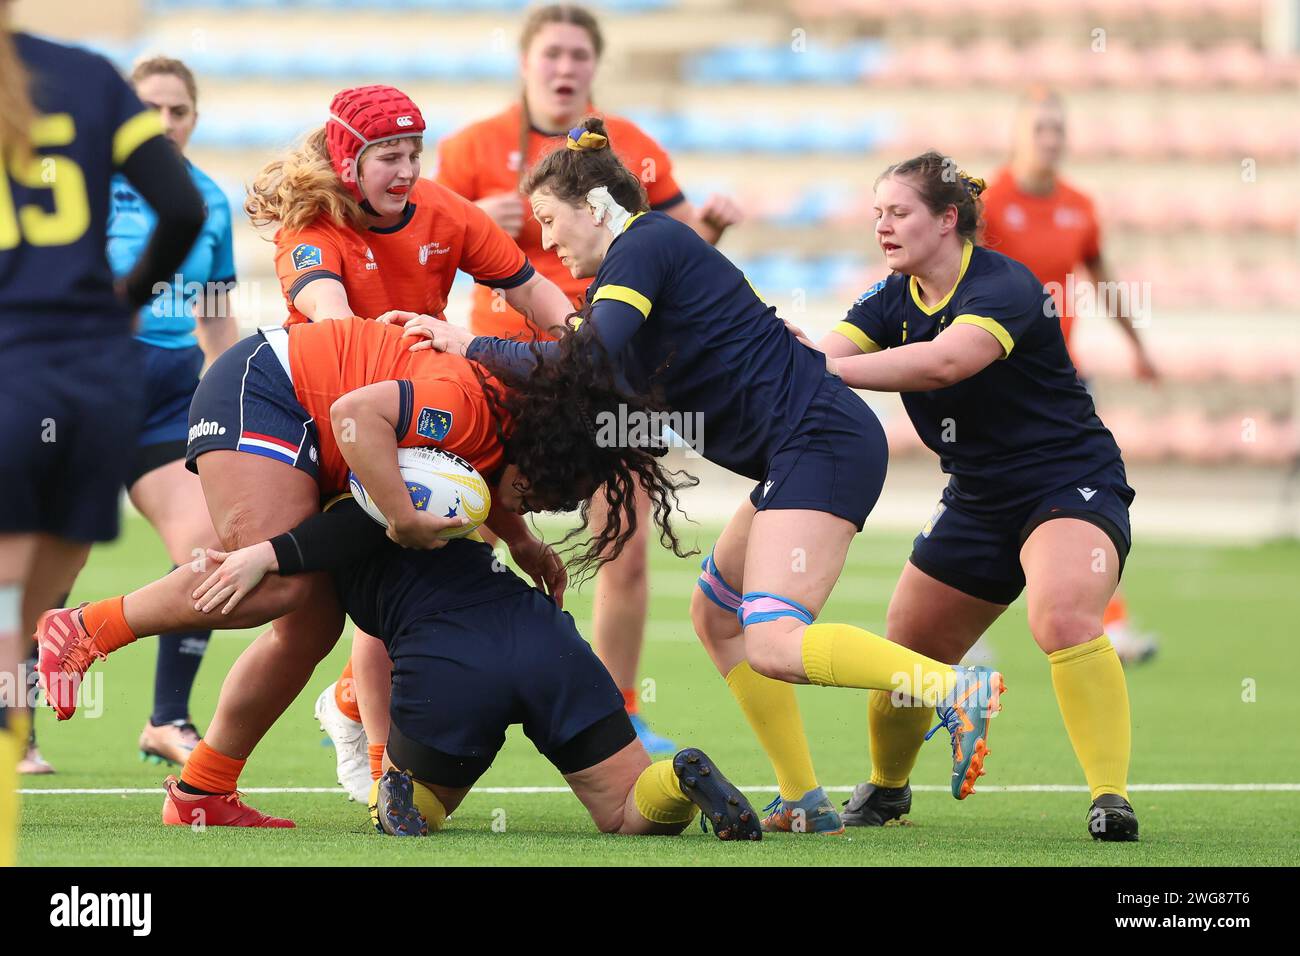 AMSTERDAM, NETHERLANDS - FEBRUARY 03: Anouk Veerkamp player of Hartpury college (GB) Nicky Dix player of RC Waterland during the international Rugby E Stock Photo